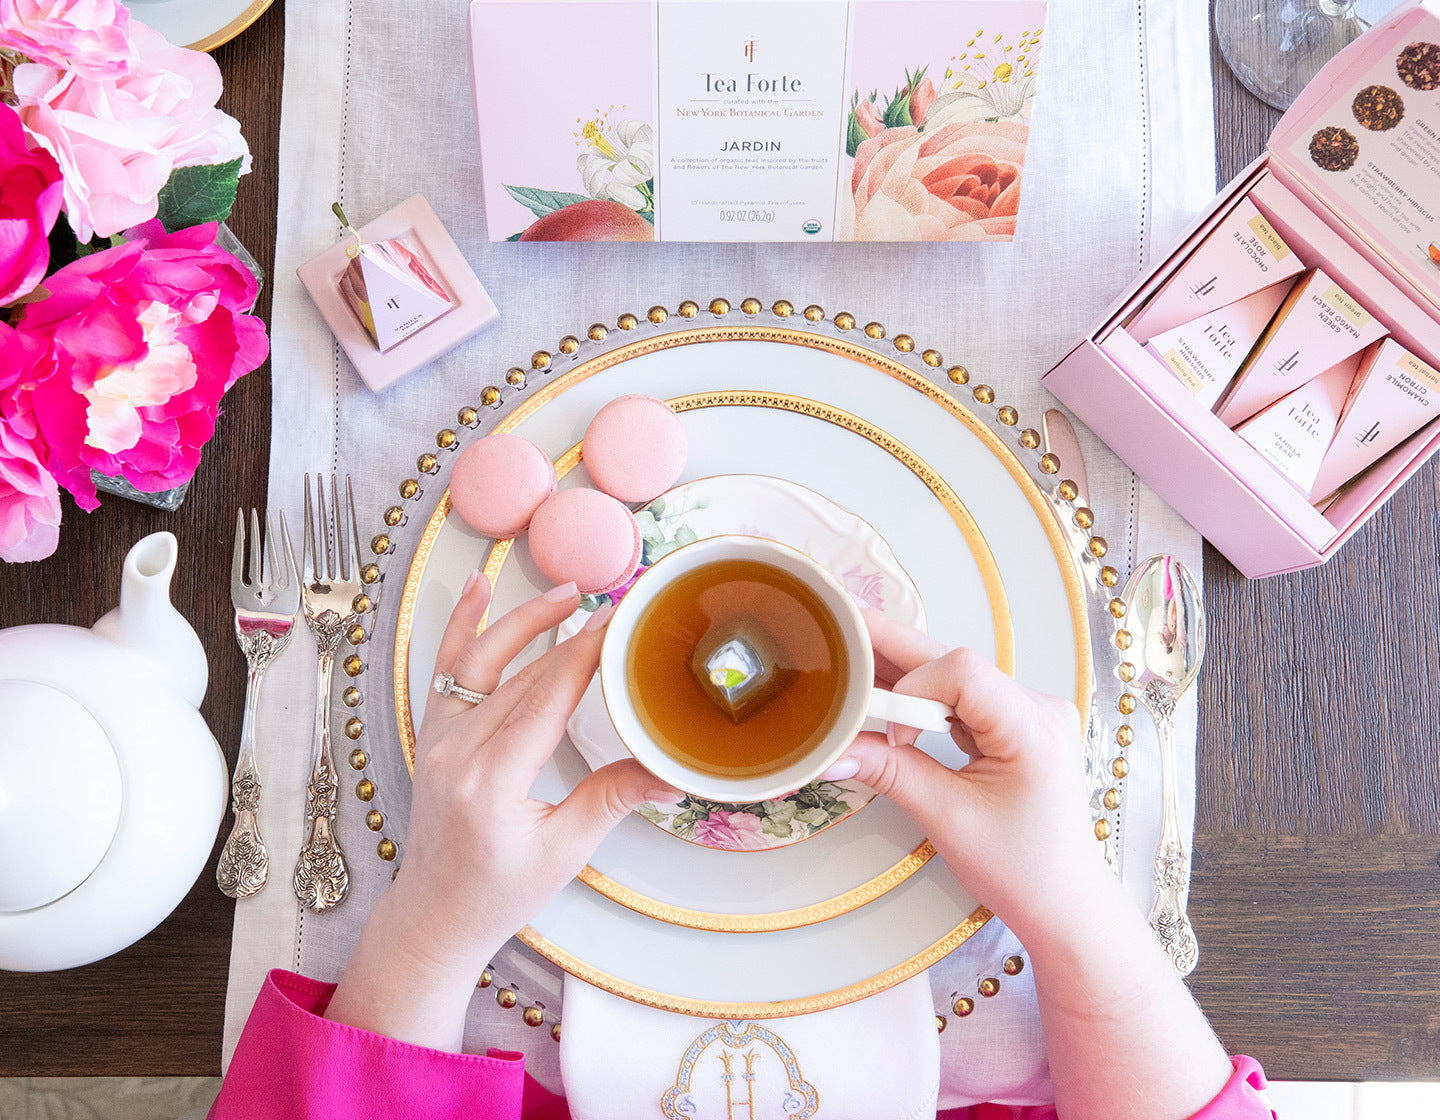 Holding a cup of Jardin tea on a table with pink cookies, gold-rimmed plates & pink napkins